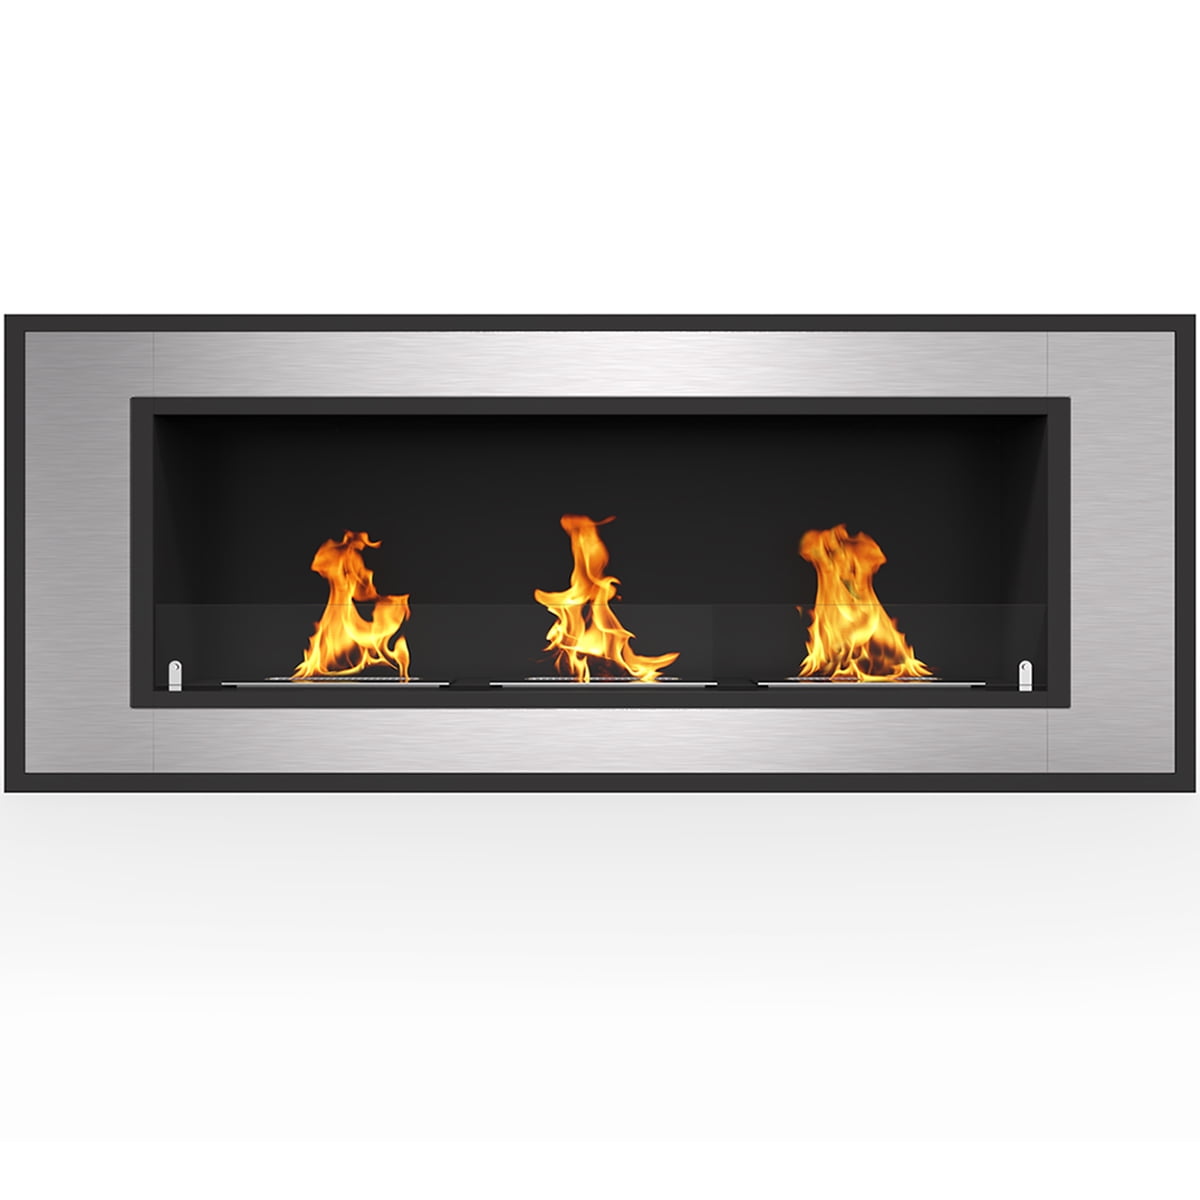 Regal Flame Cynergy 50" Ventless Built In Wall Recessed Bio Ethanol Wall Mounted Fireplace Similar Electric Fireplaces, Gas Logs